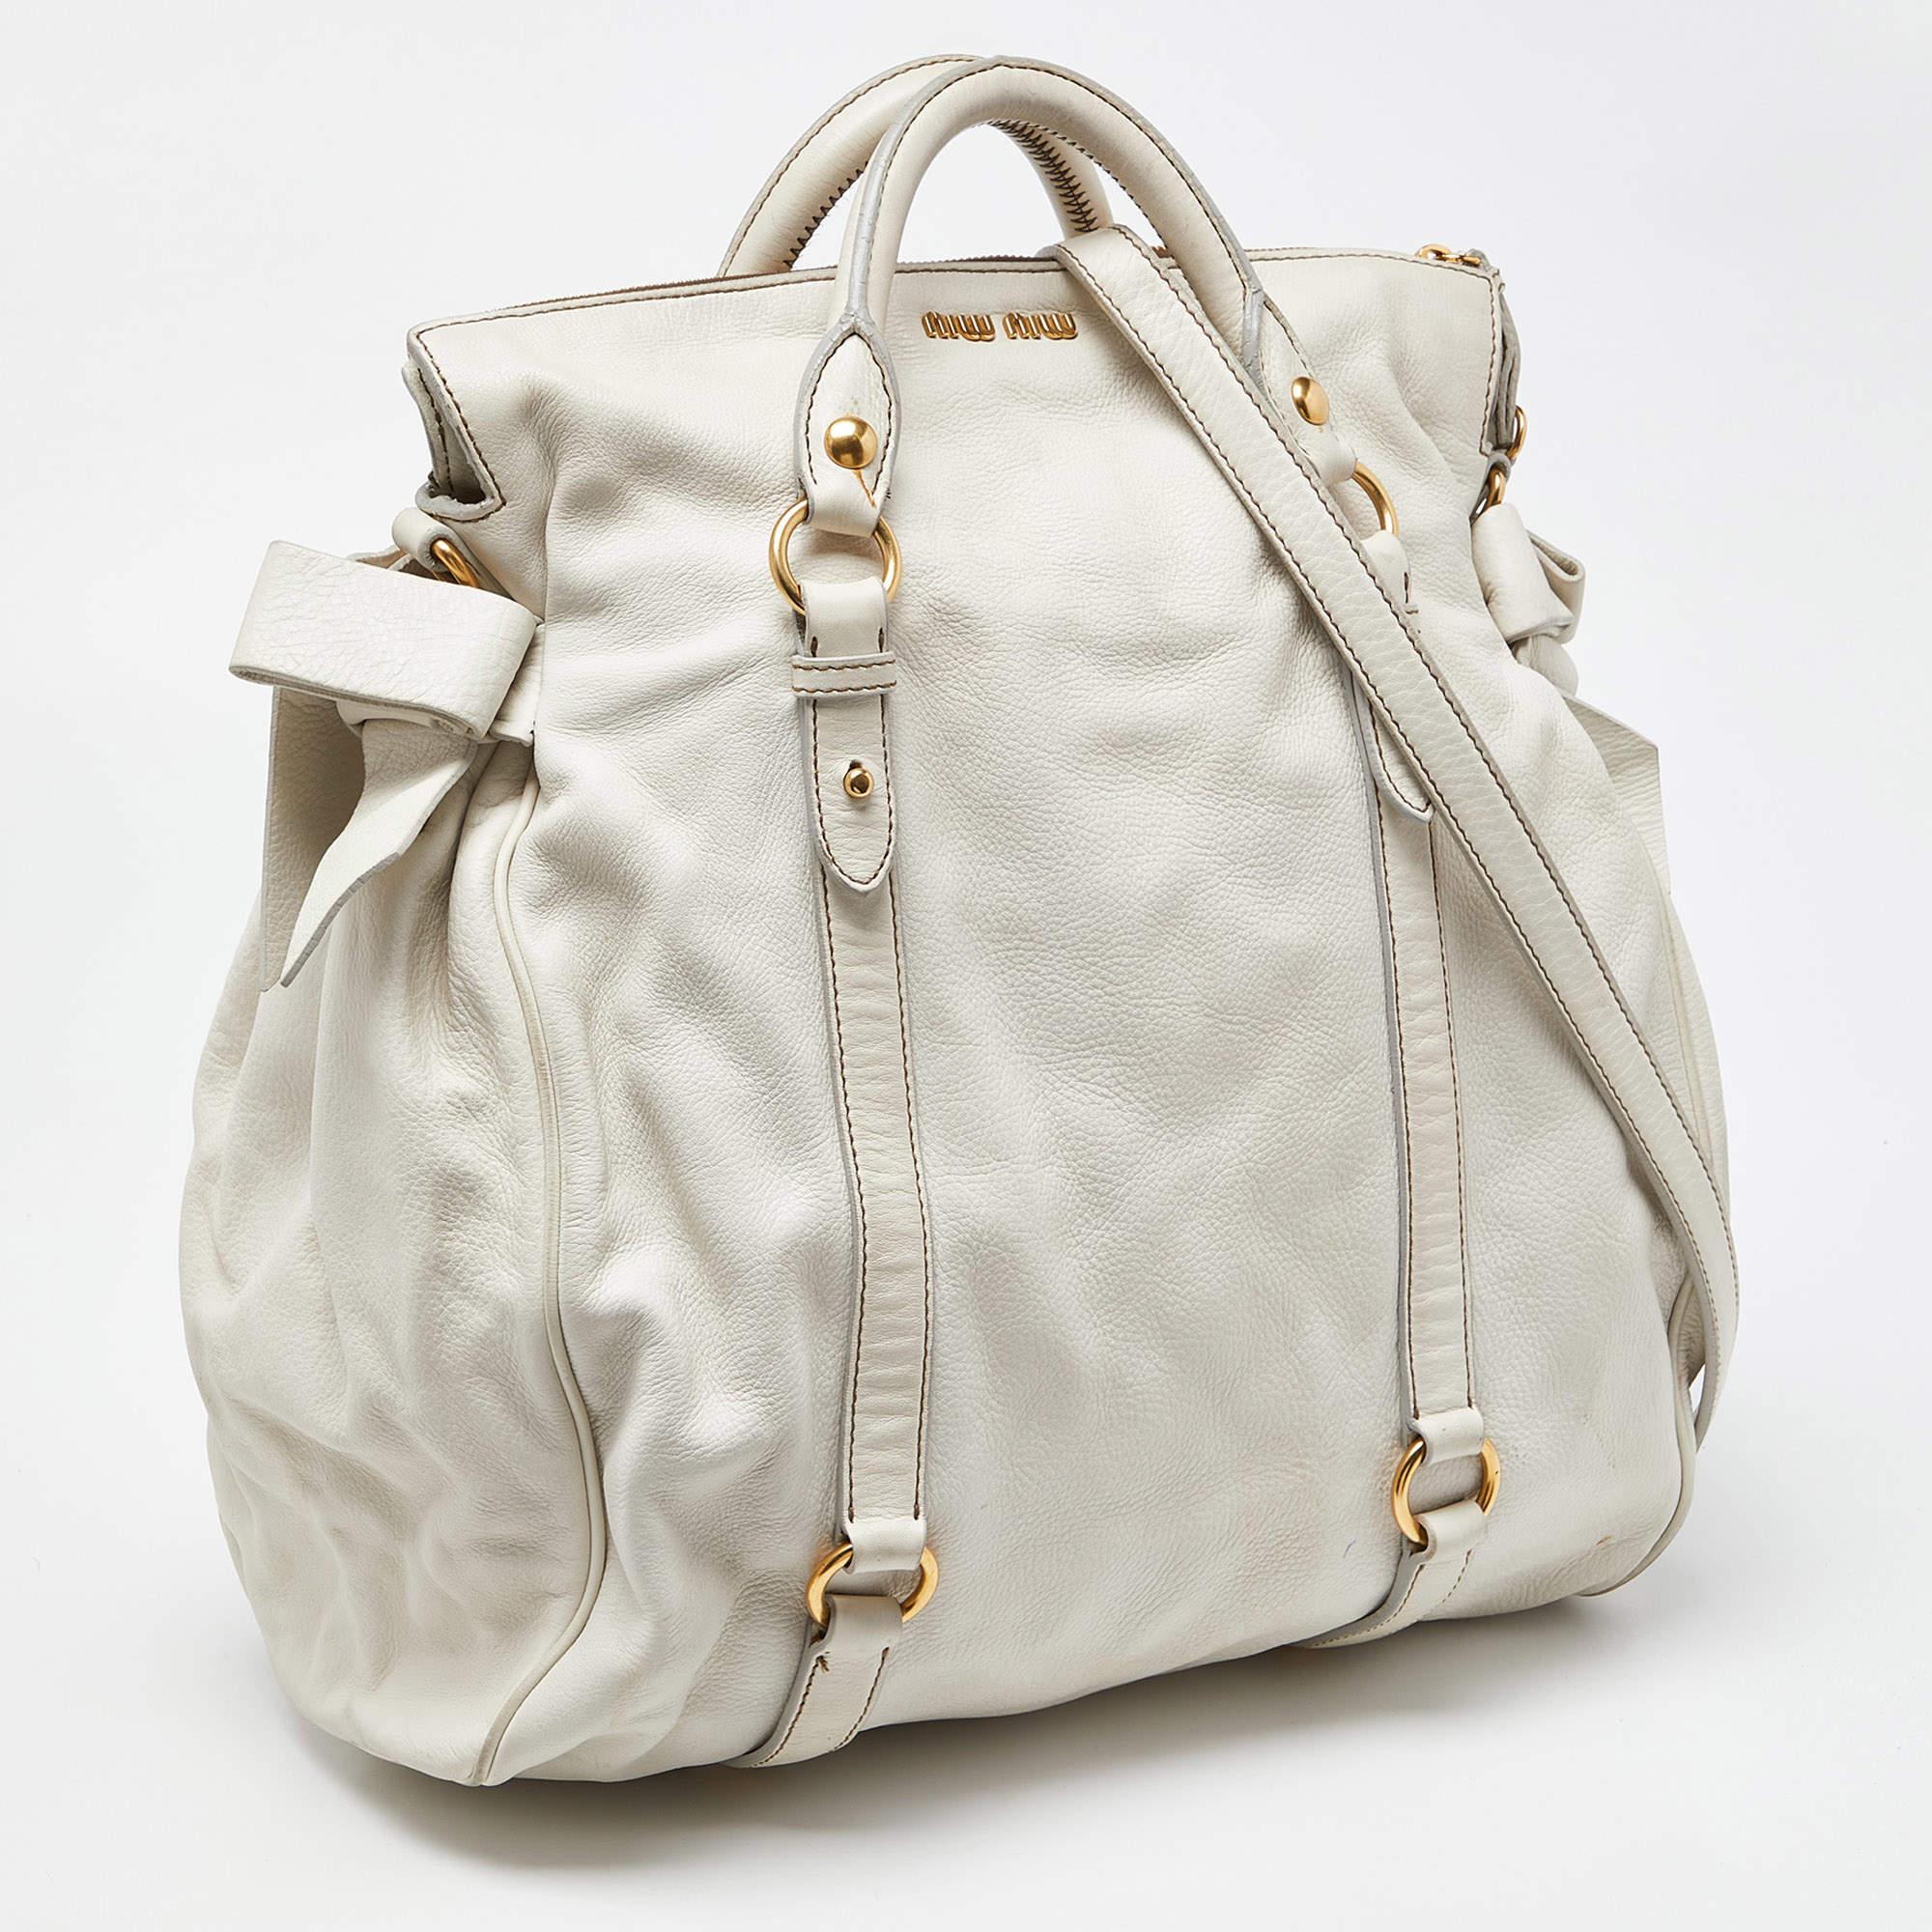 Women's Miu Miu White Leather Fold Over Bow Bag For Sale